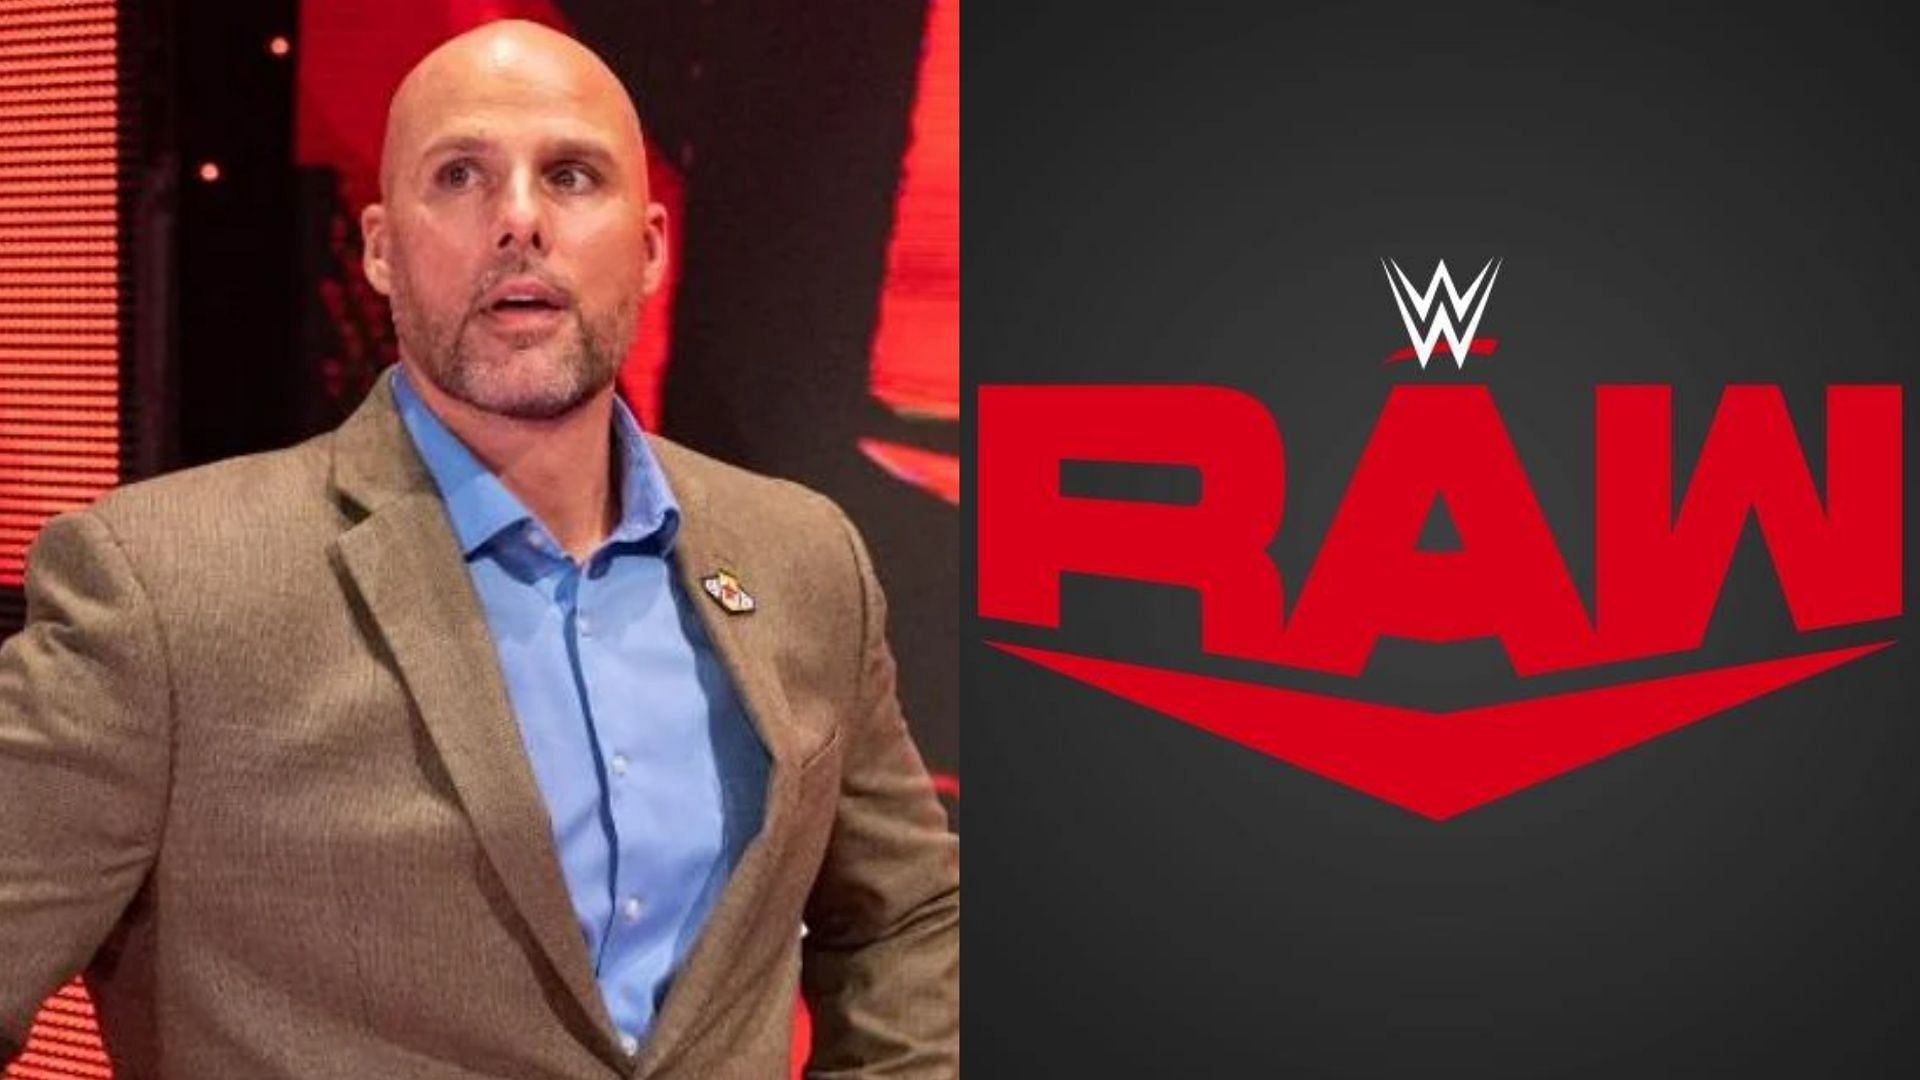 Adam Pearce is the general manager of WWE RAW.